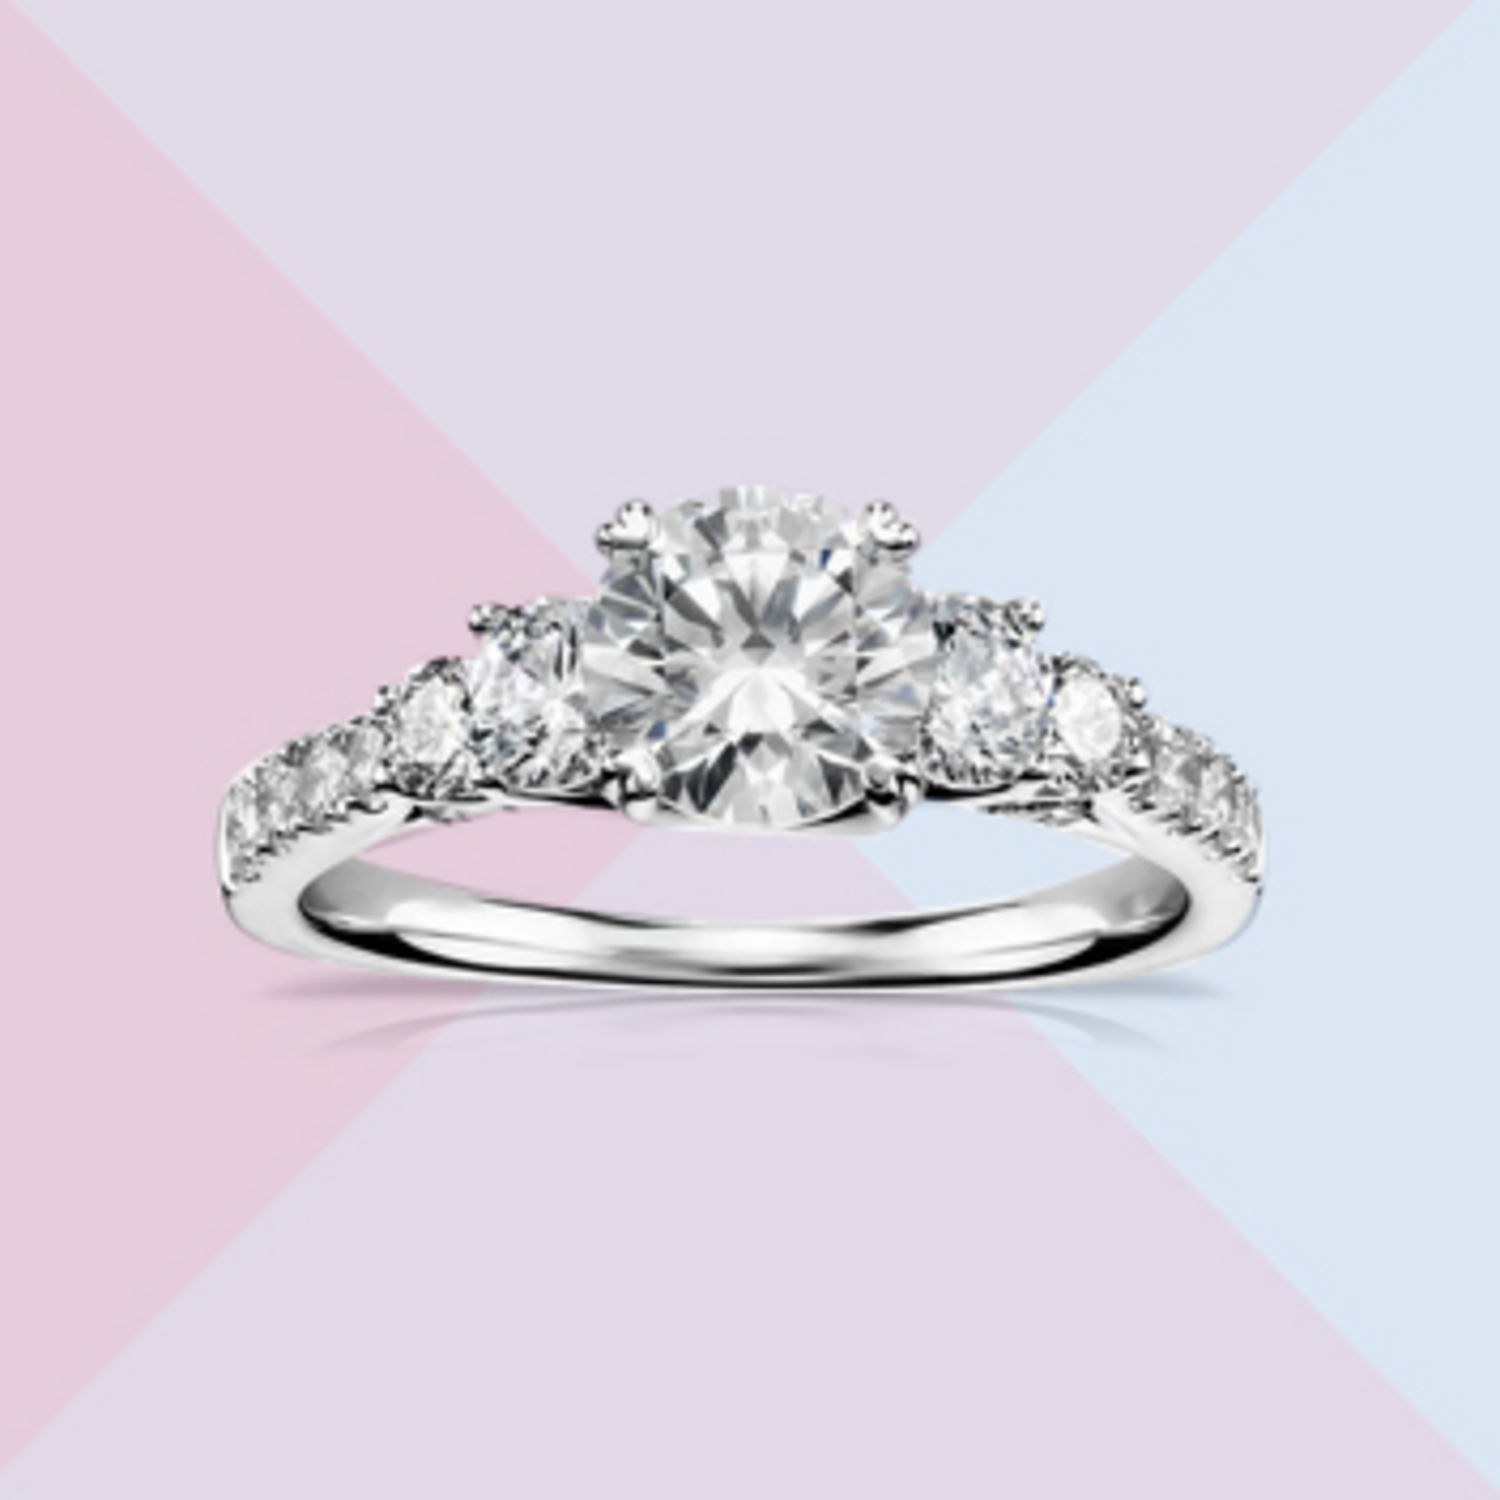 Under $1,000 Engagement Rings: 9 Rings for Free Spirits, Rebels, and ...